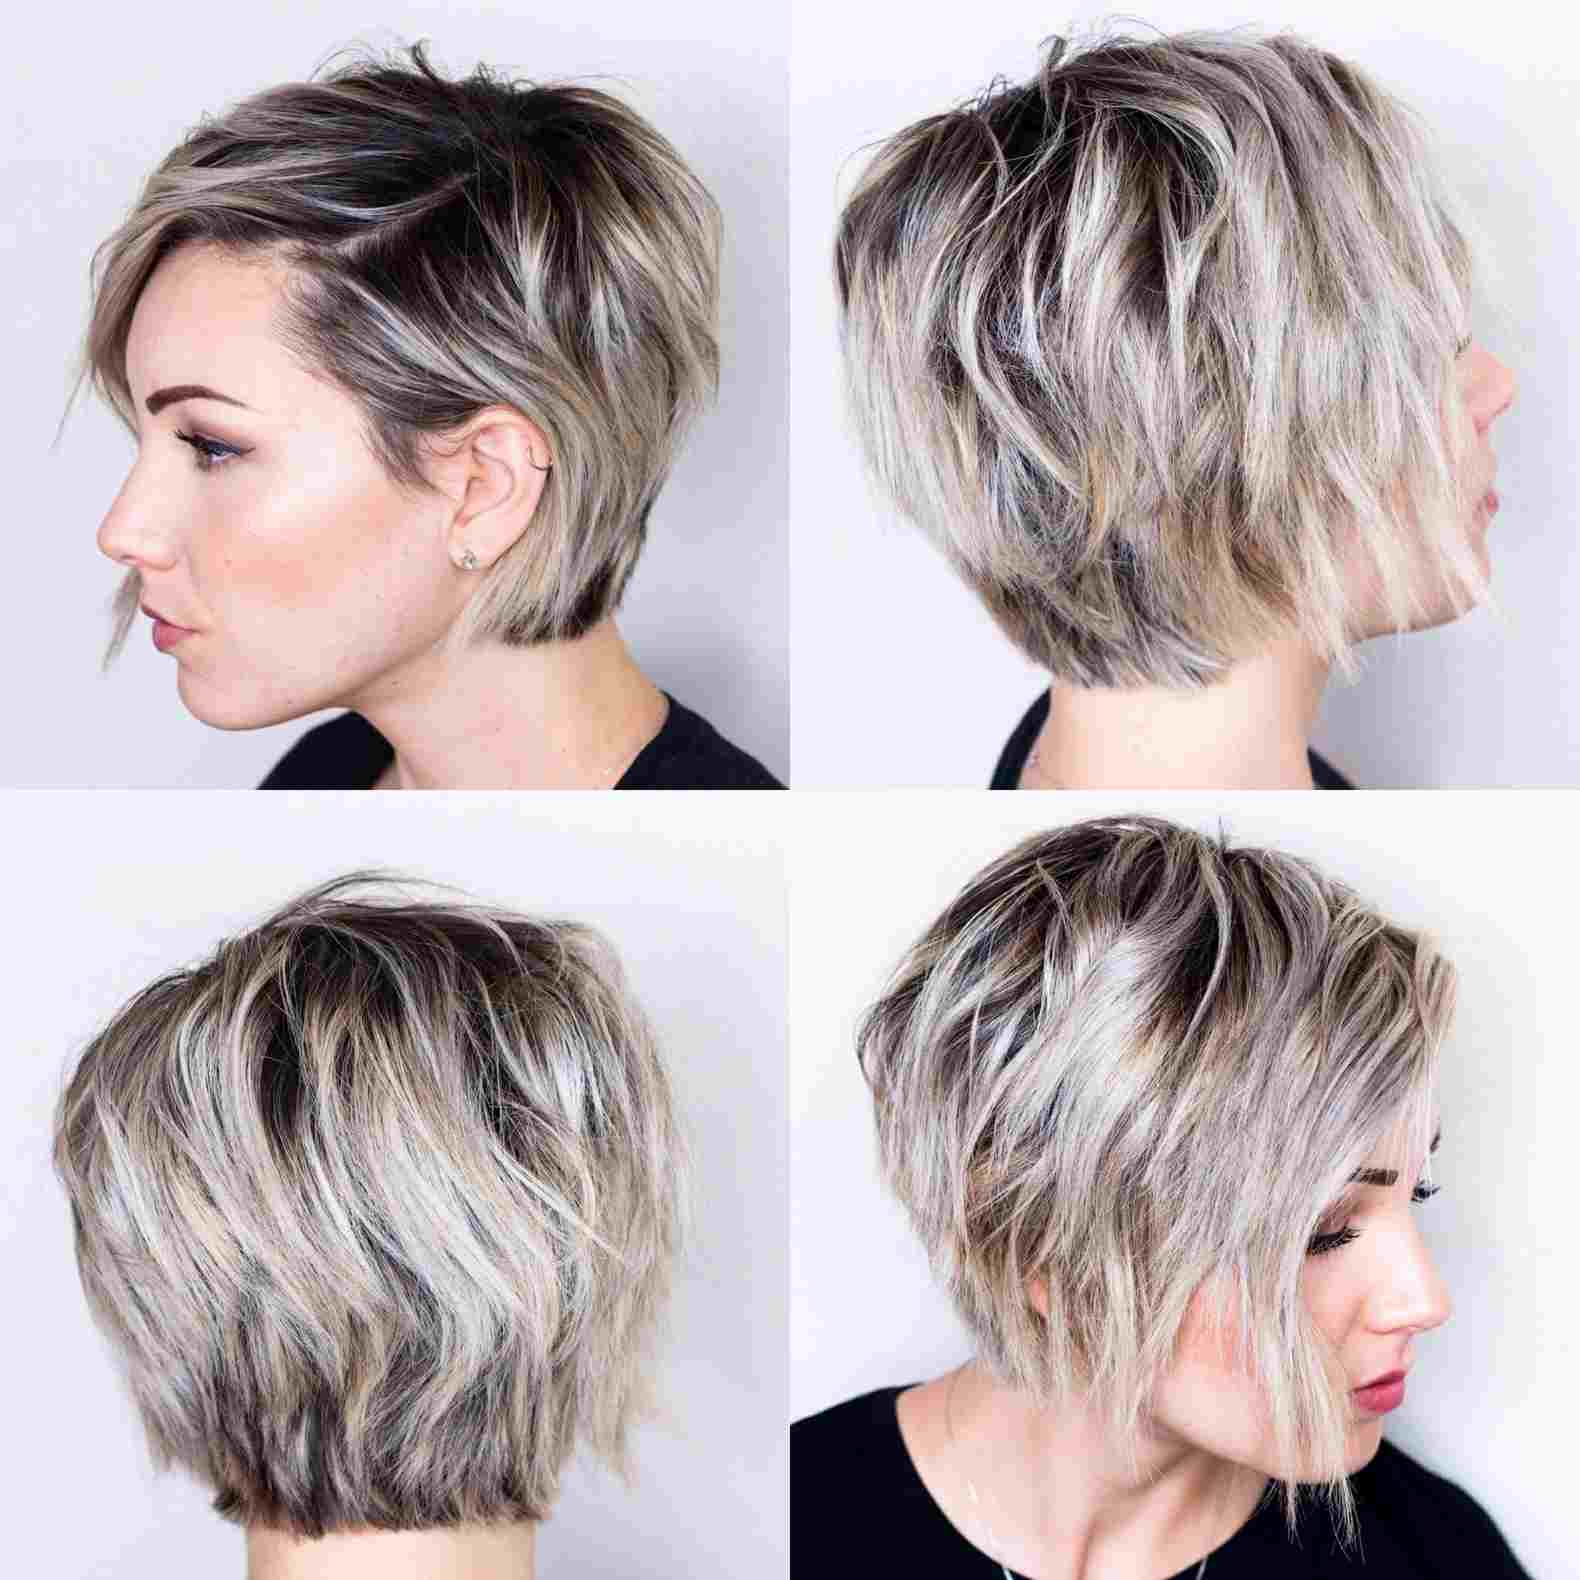 Short Bob Hairstyle Is The Most Beautiful Trend Of The Year 40 Ideas Decor Object Your Daily Dose Of Best Home Decorating Ideas Interior Design Inspiration